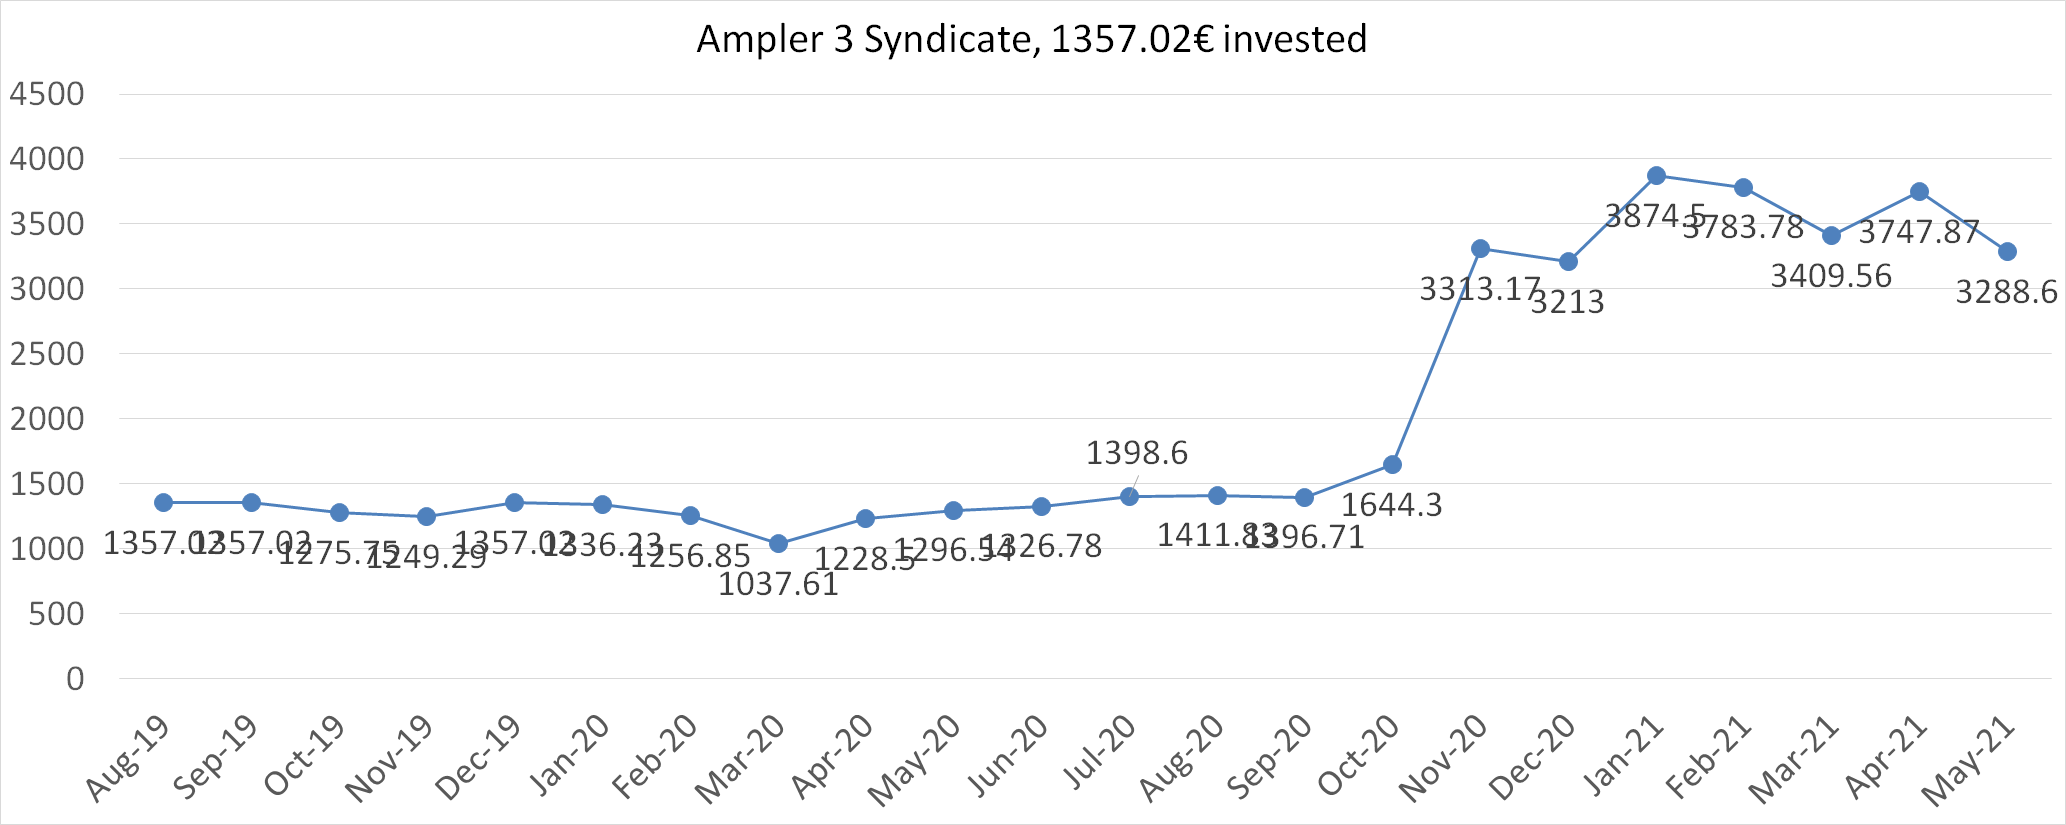 ampler 3 syndicate worth in may 2021